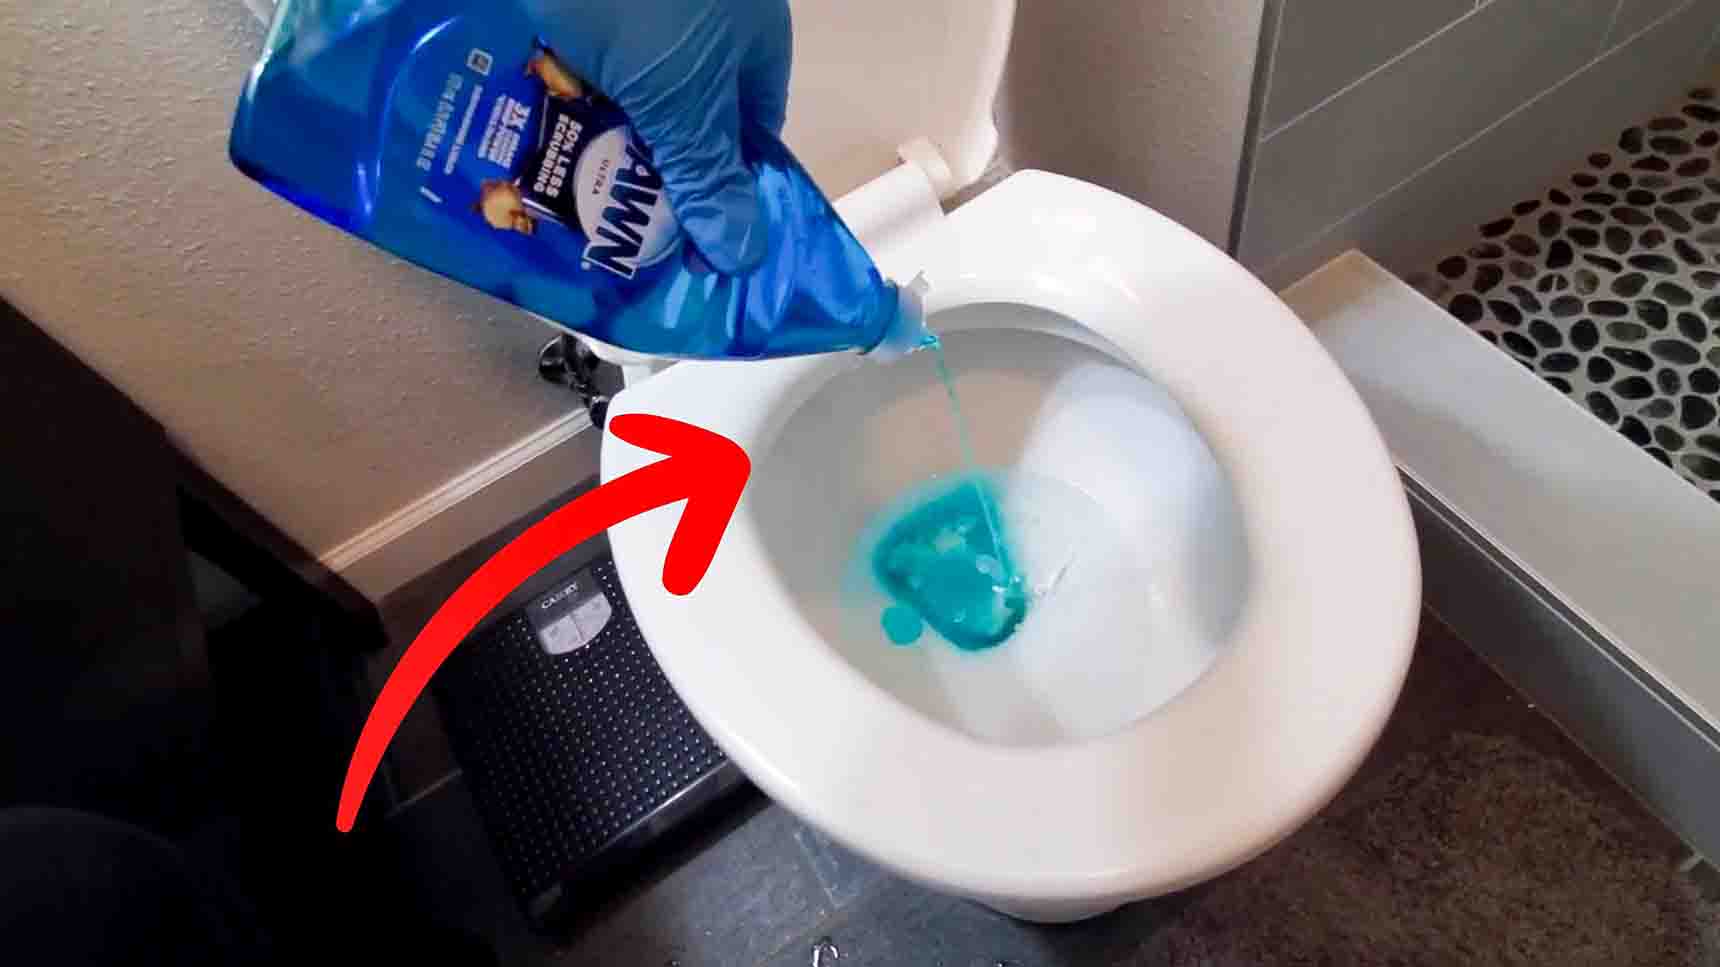 https://diyjoy.com/wp-content/uploads/2023/03/how-to-unclog-a-toilet-without-a-plunger-tutorial.jpg